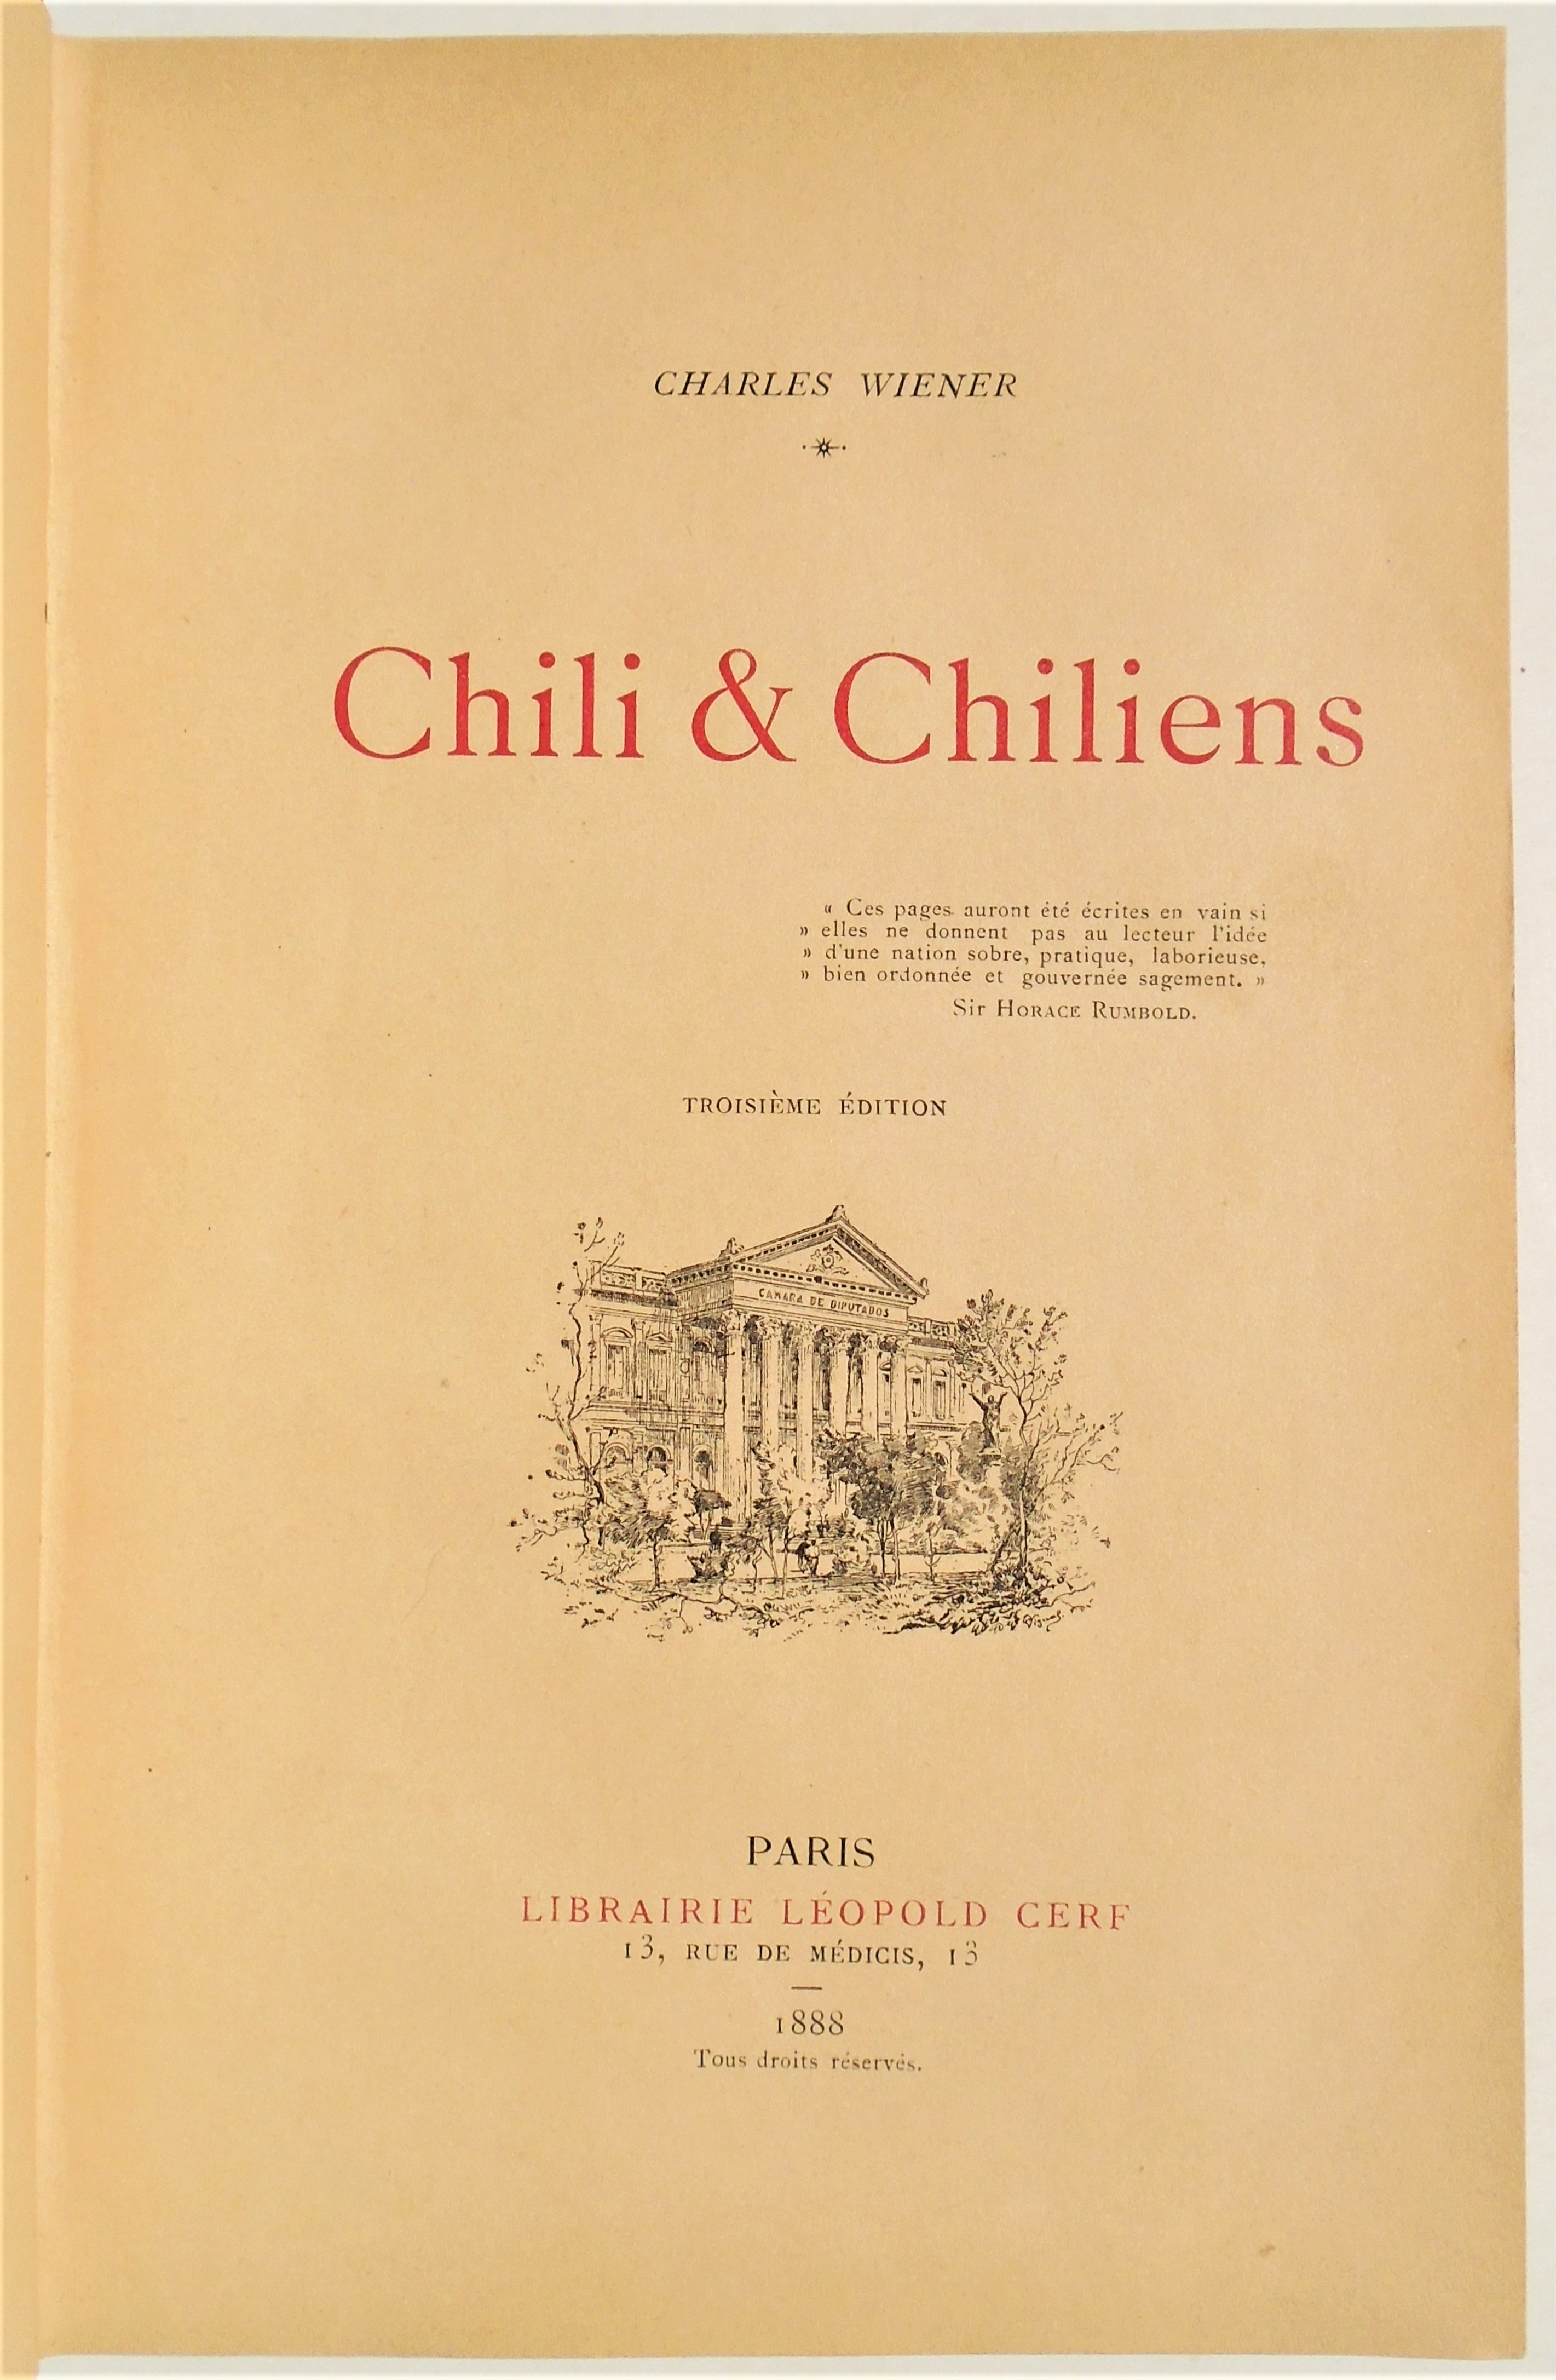 Charles Wiener - Chili & Chiliens